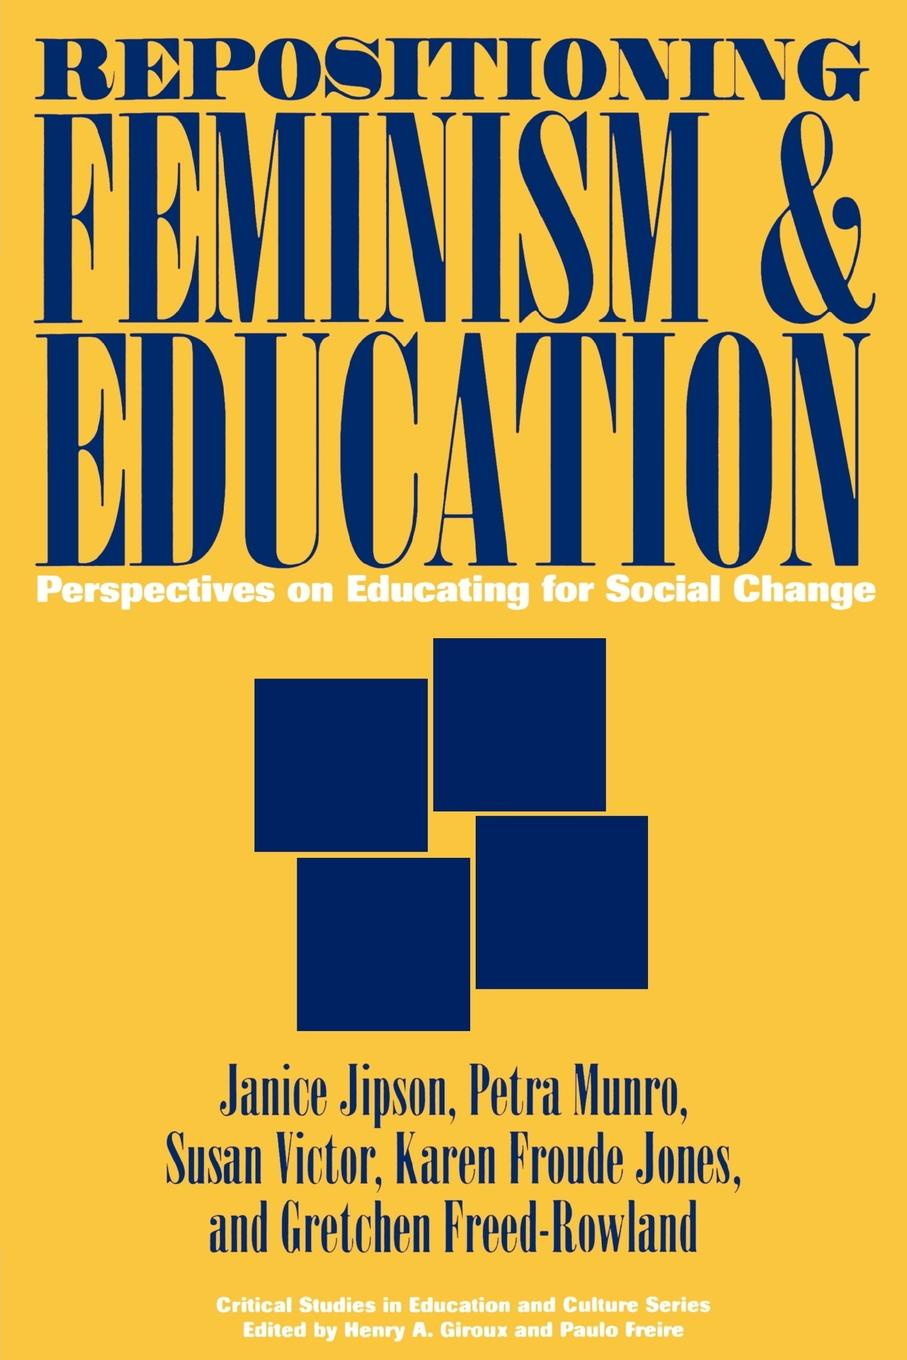 Repositioning Feminism & Education. Perspectives on Educating for Social Change